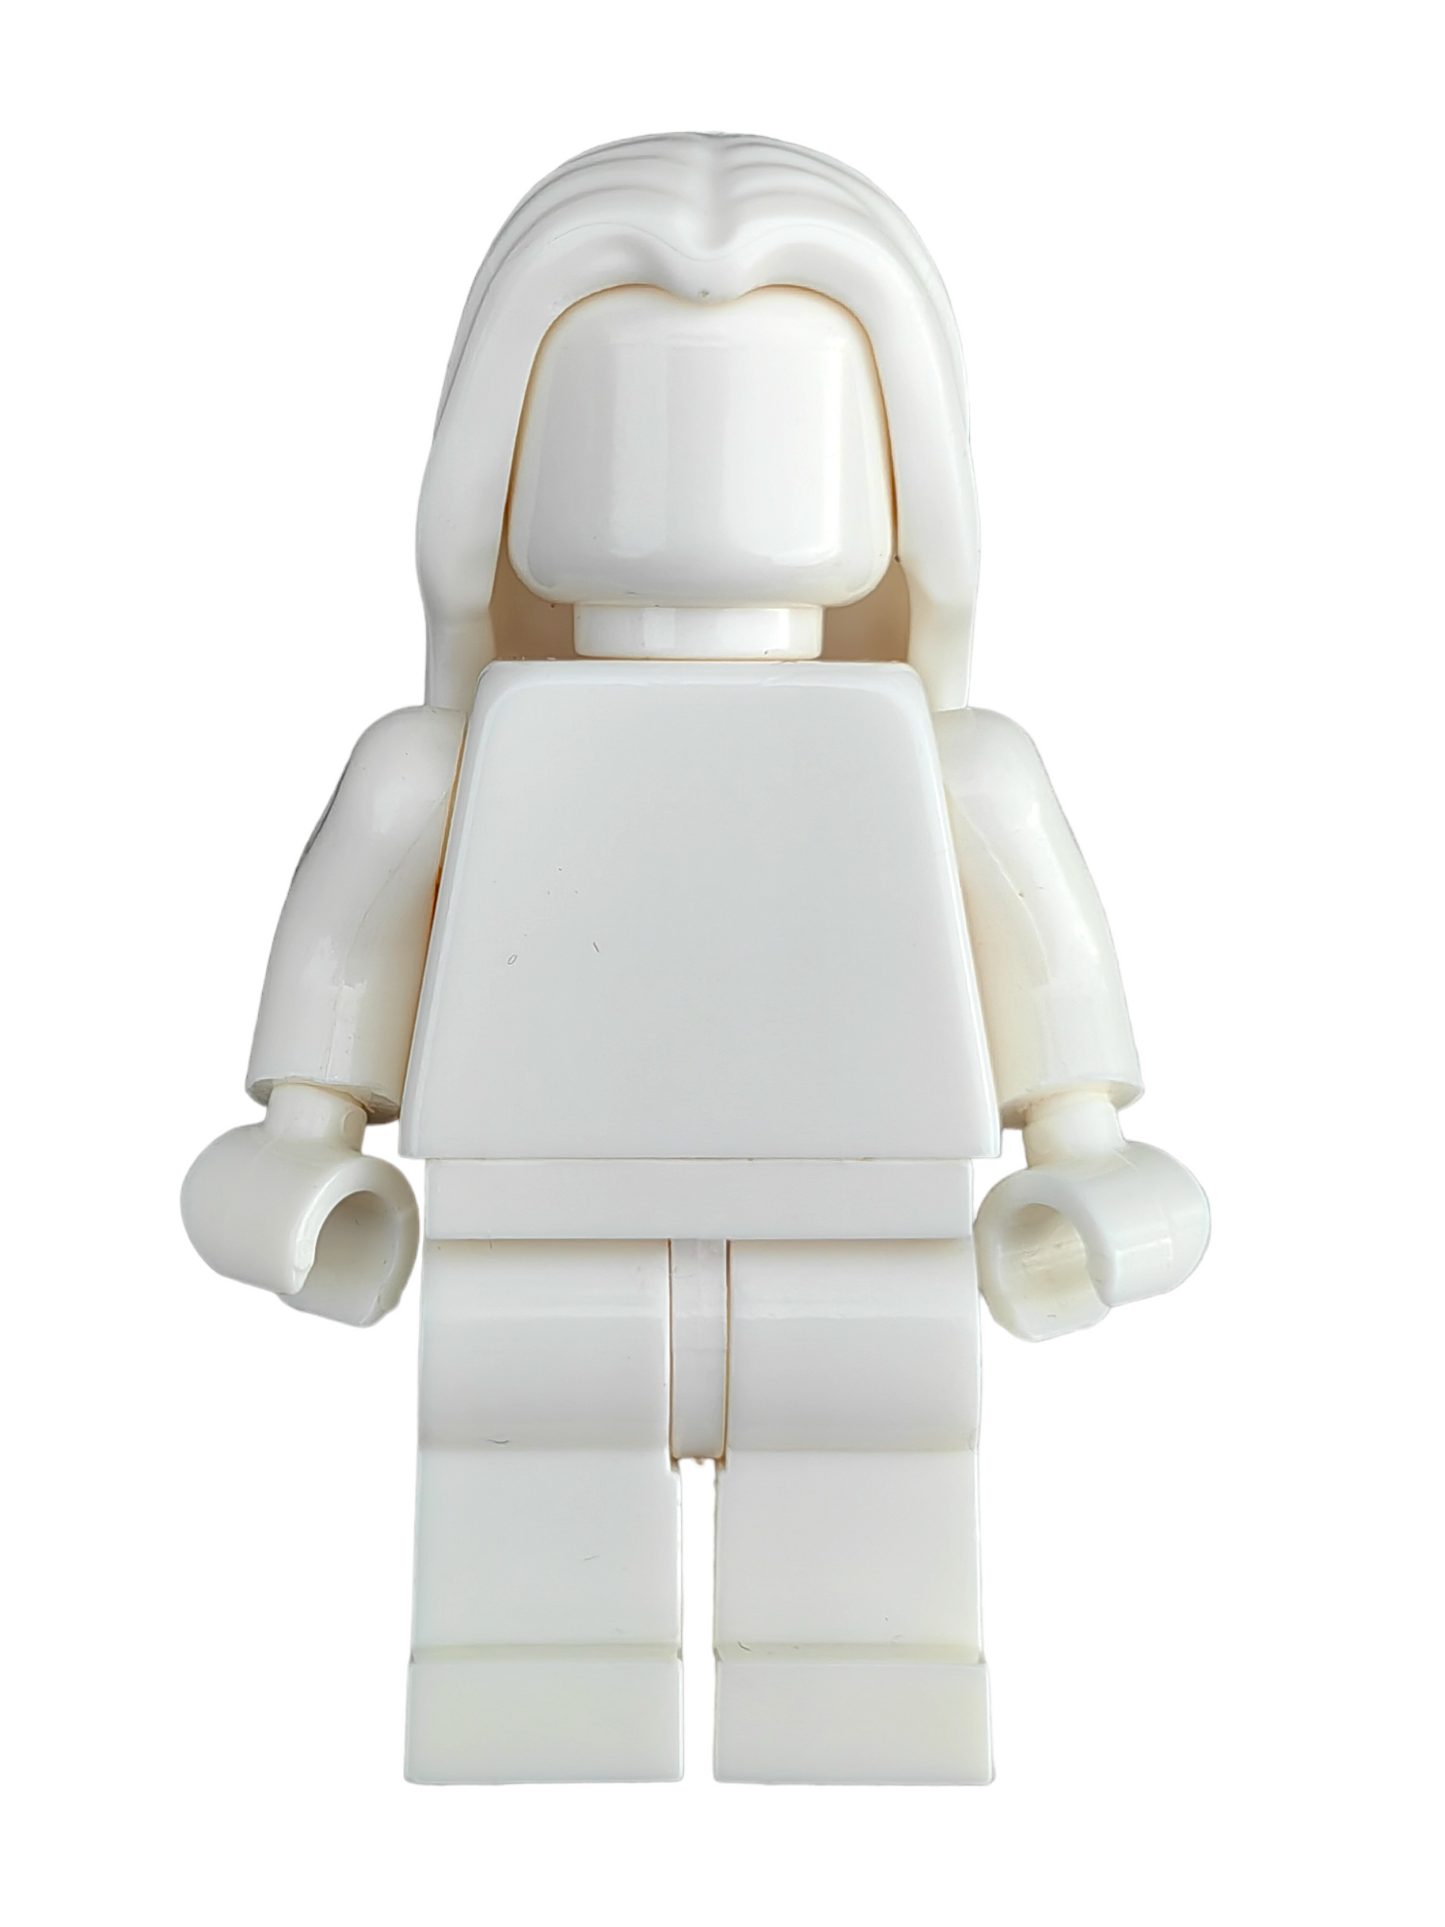 LEGO Wig, White Hair Long and  Parted in Middle -  UB1337